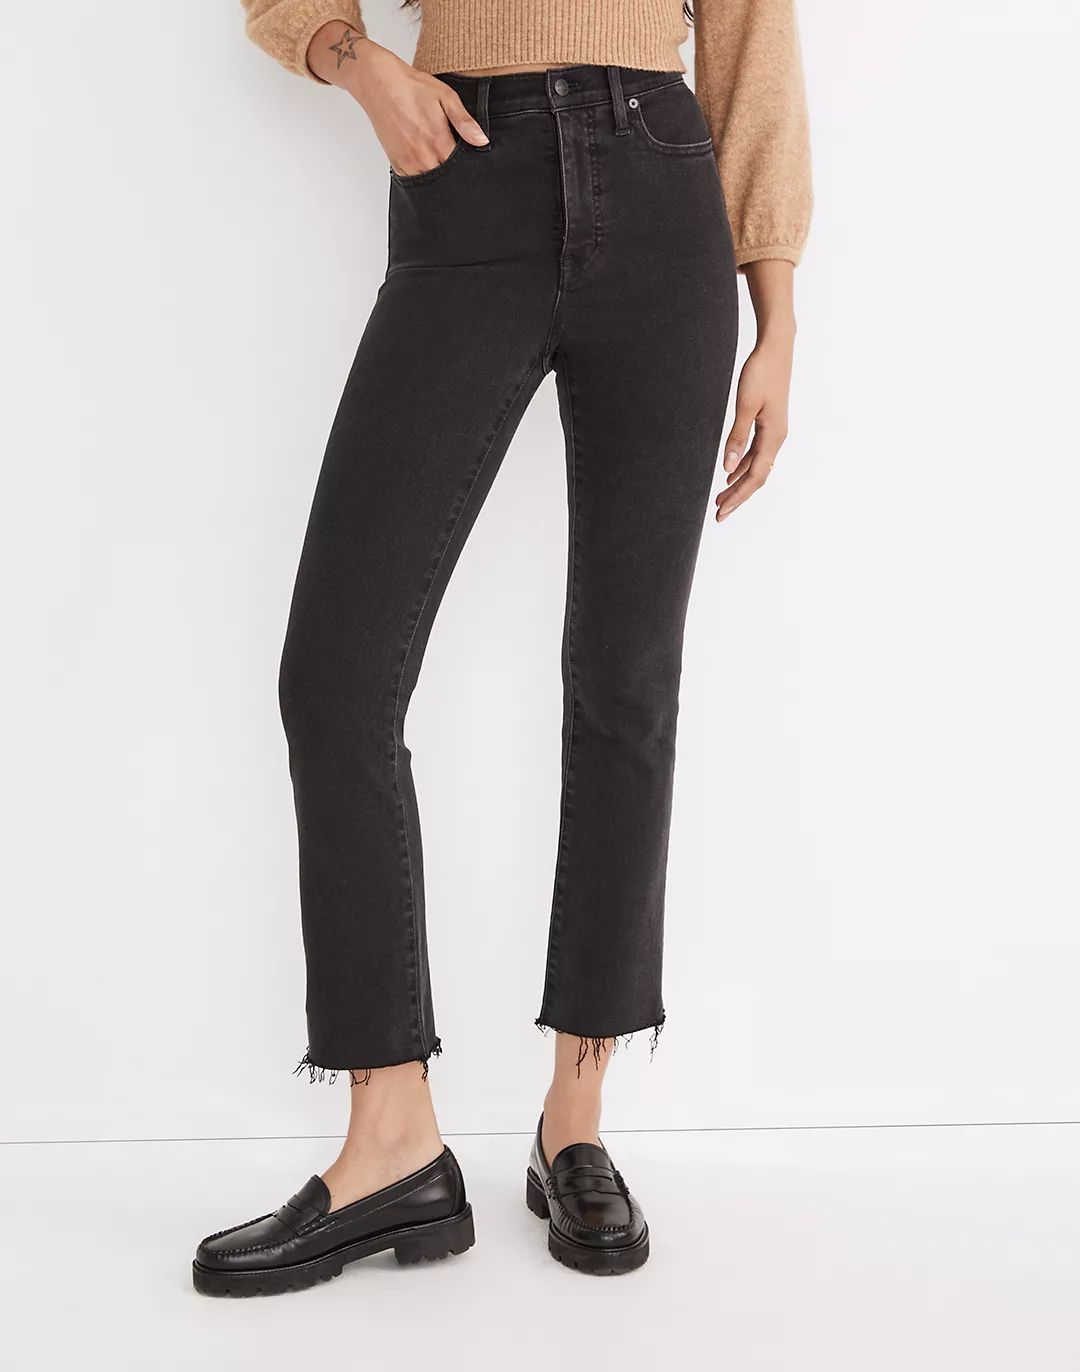 Tall Cali Demi-Boot Jeans in Bayland Wash: Raw-Hem Edition | Madewell